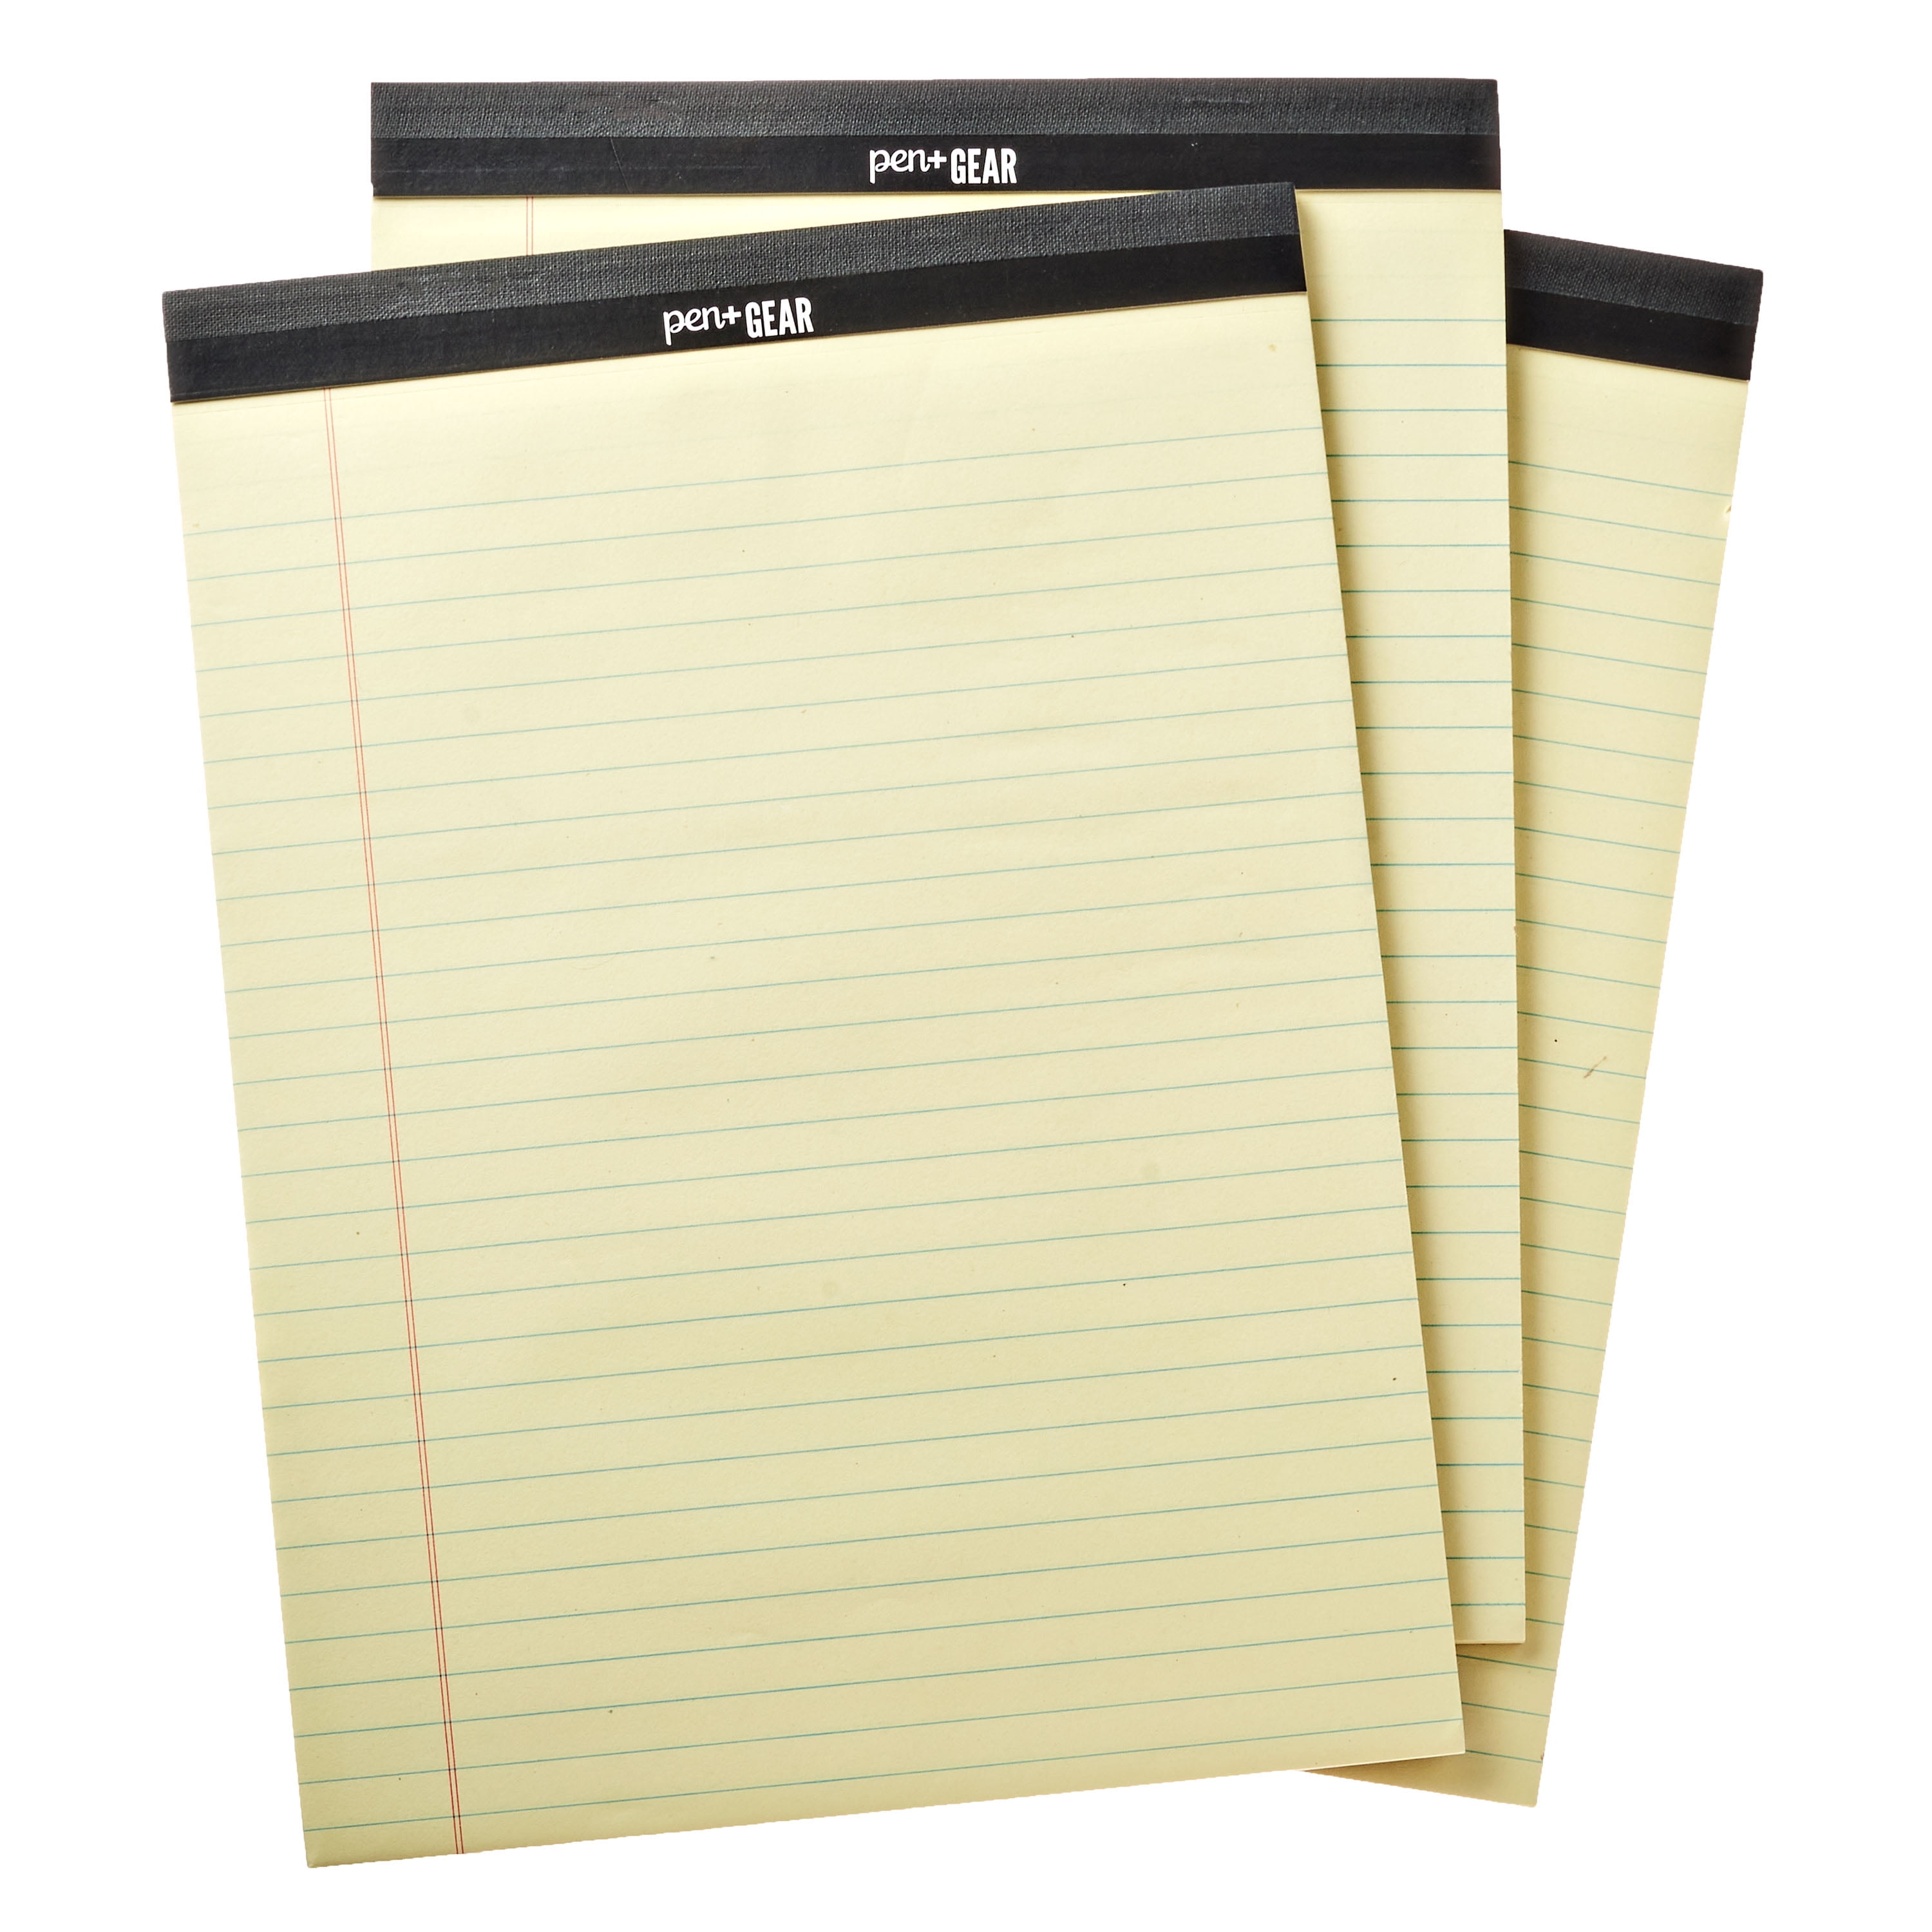 Pen + Gear Legal Pads, Canary Paper, 50 Sheets, 3 Count